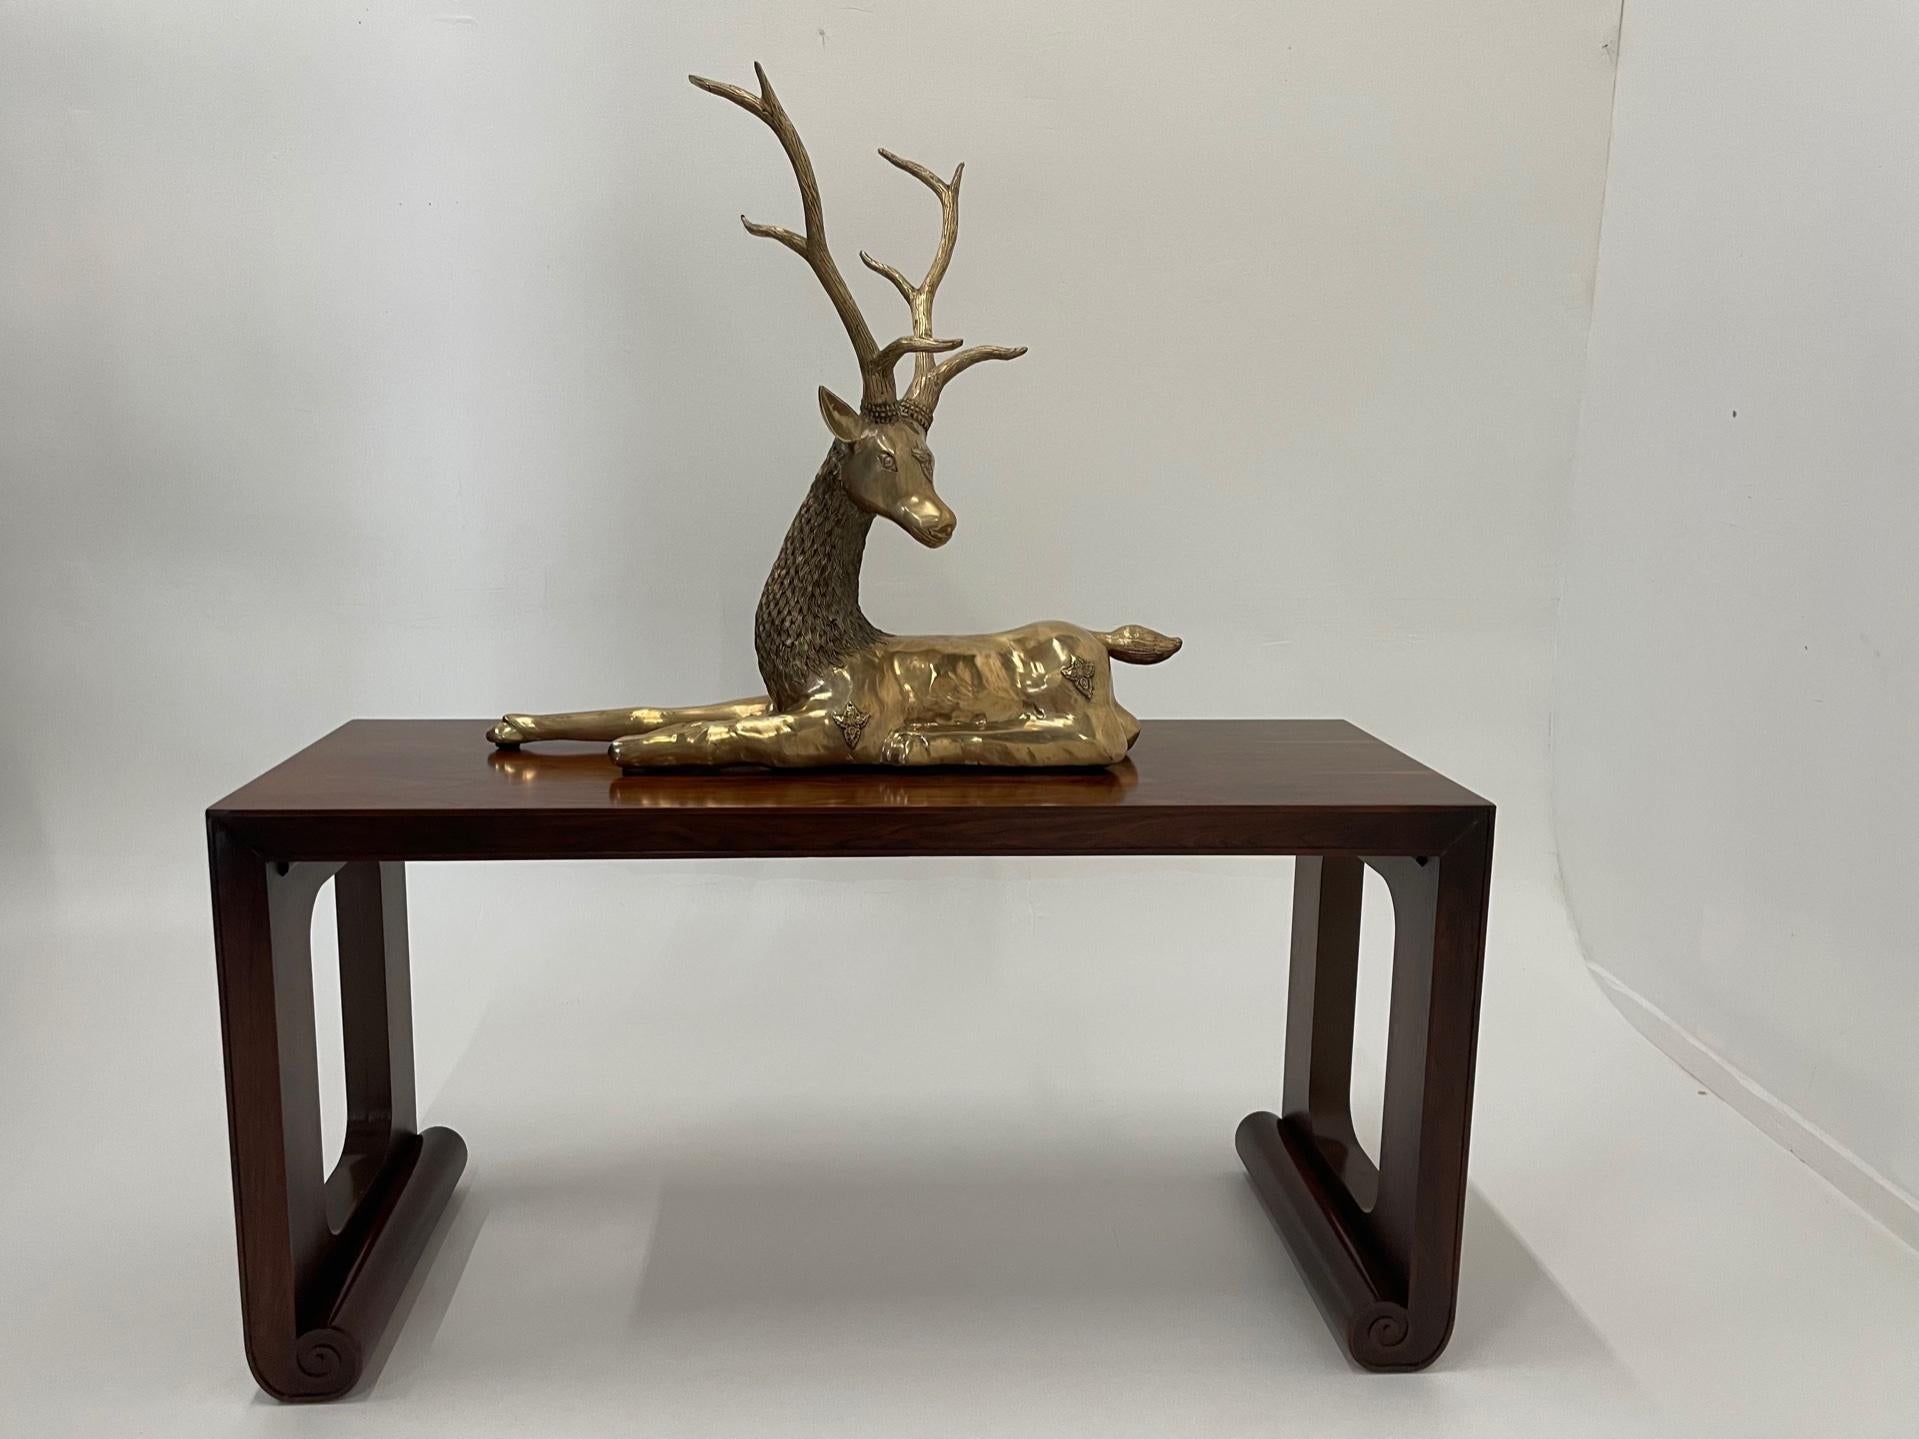 Impressive and elegant monumental polished brass reclining stag table top sculpture having great attention to detail.